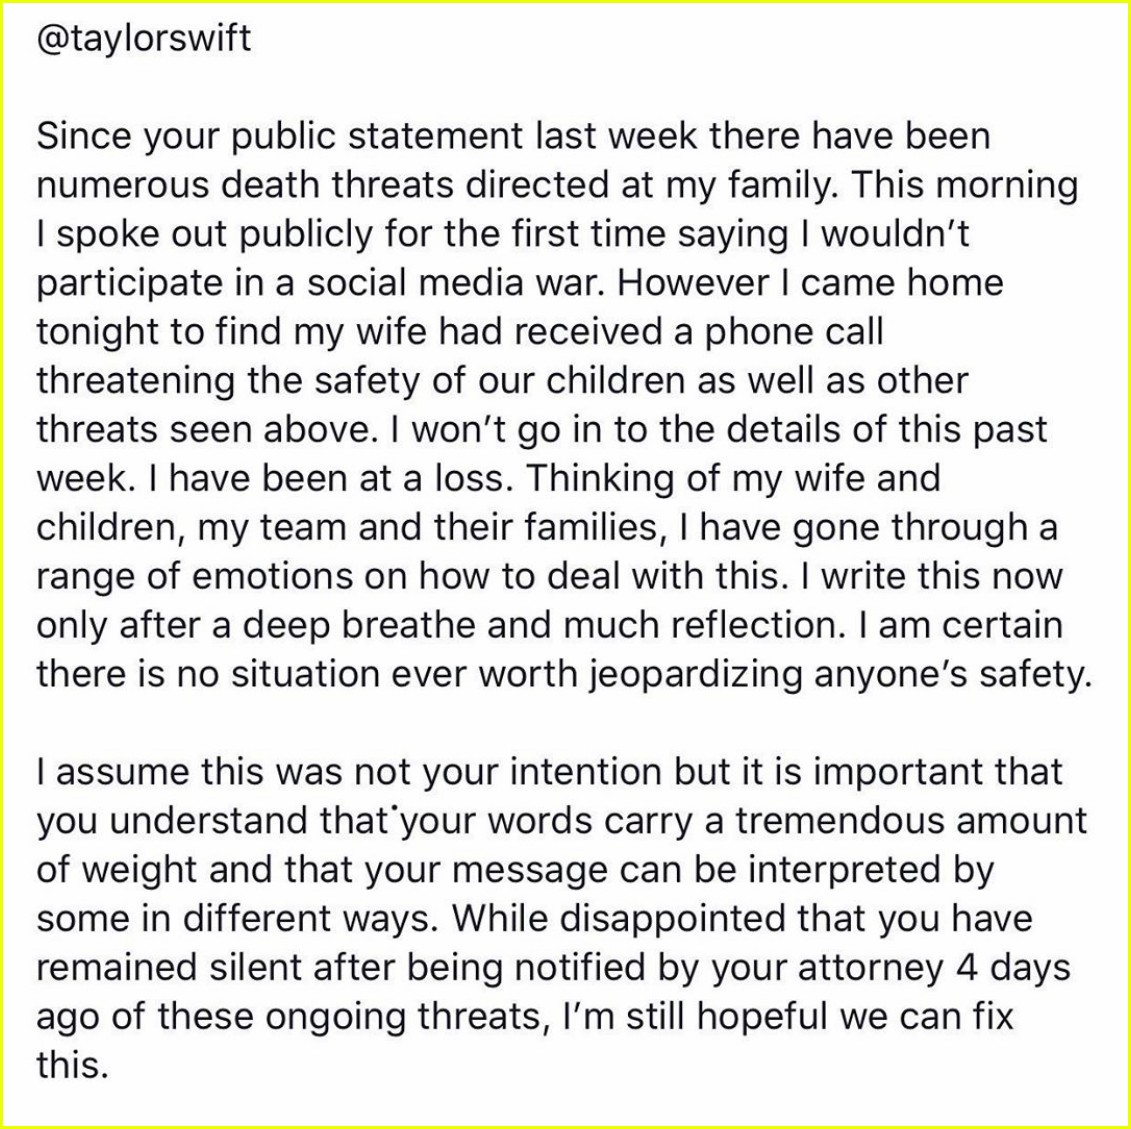 scooter braun letter to taylor swift 01